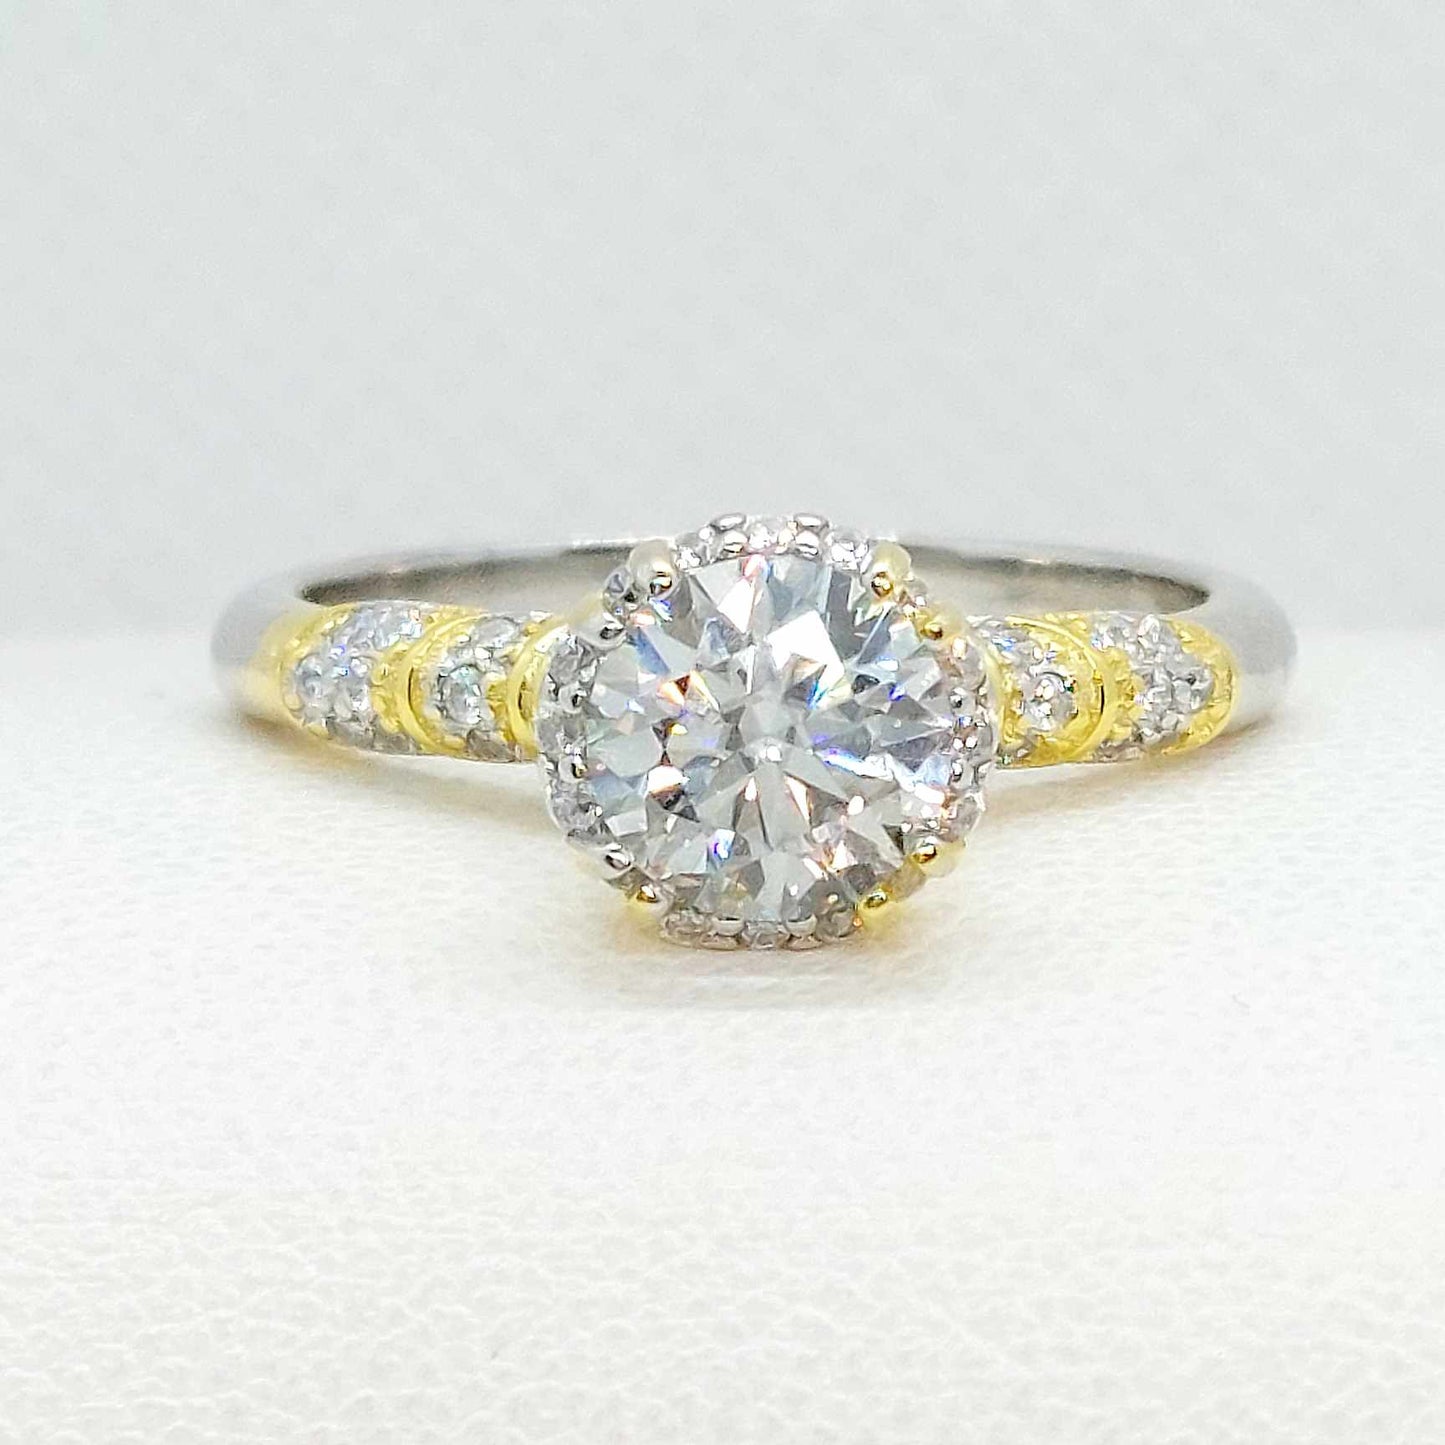 Moissanite 1ct Diamond Ring in Sterling Silver